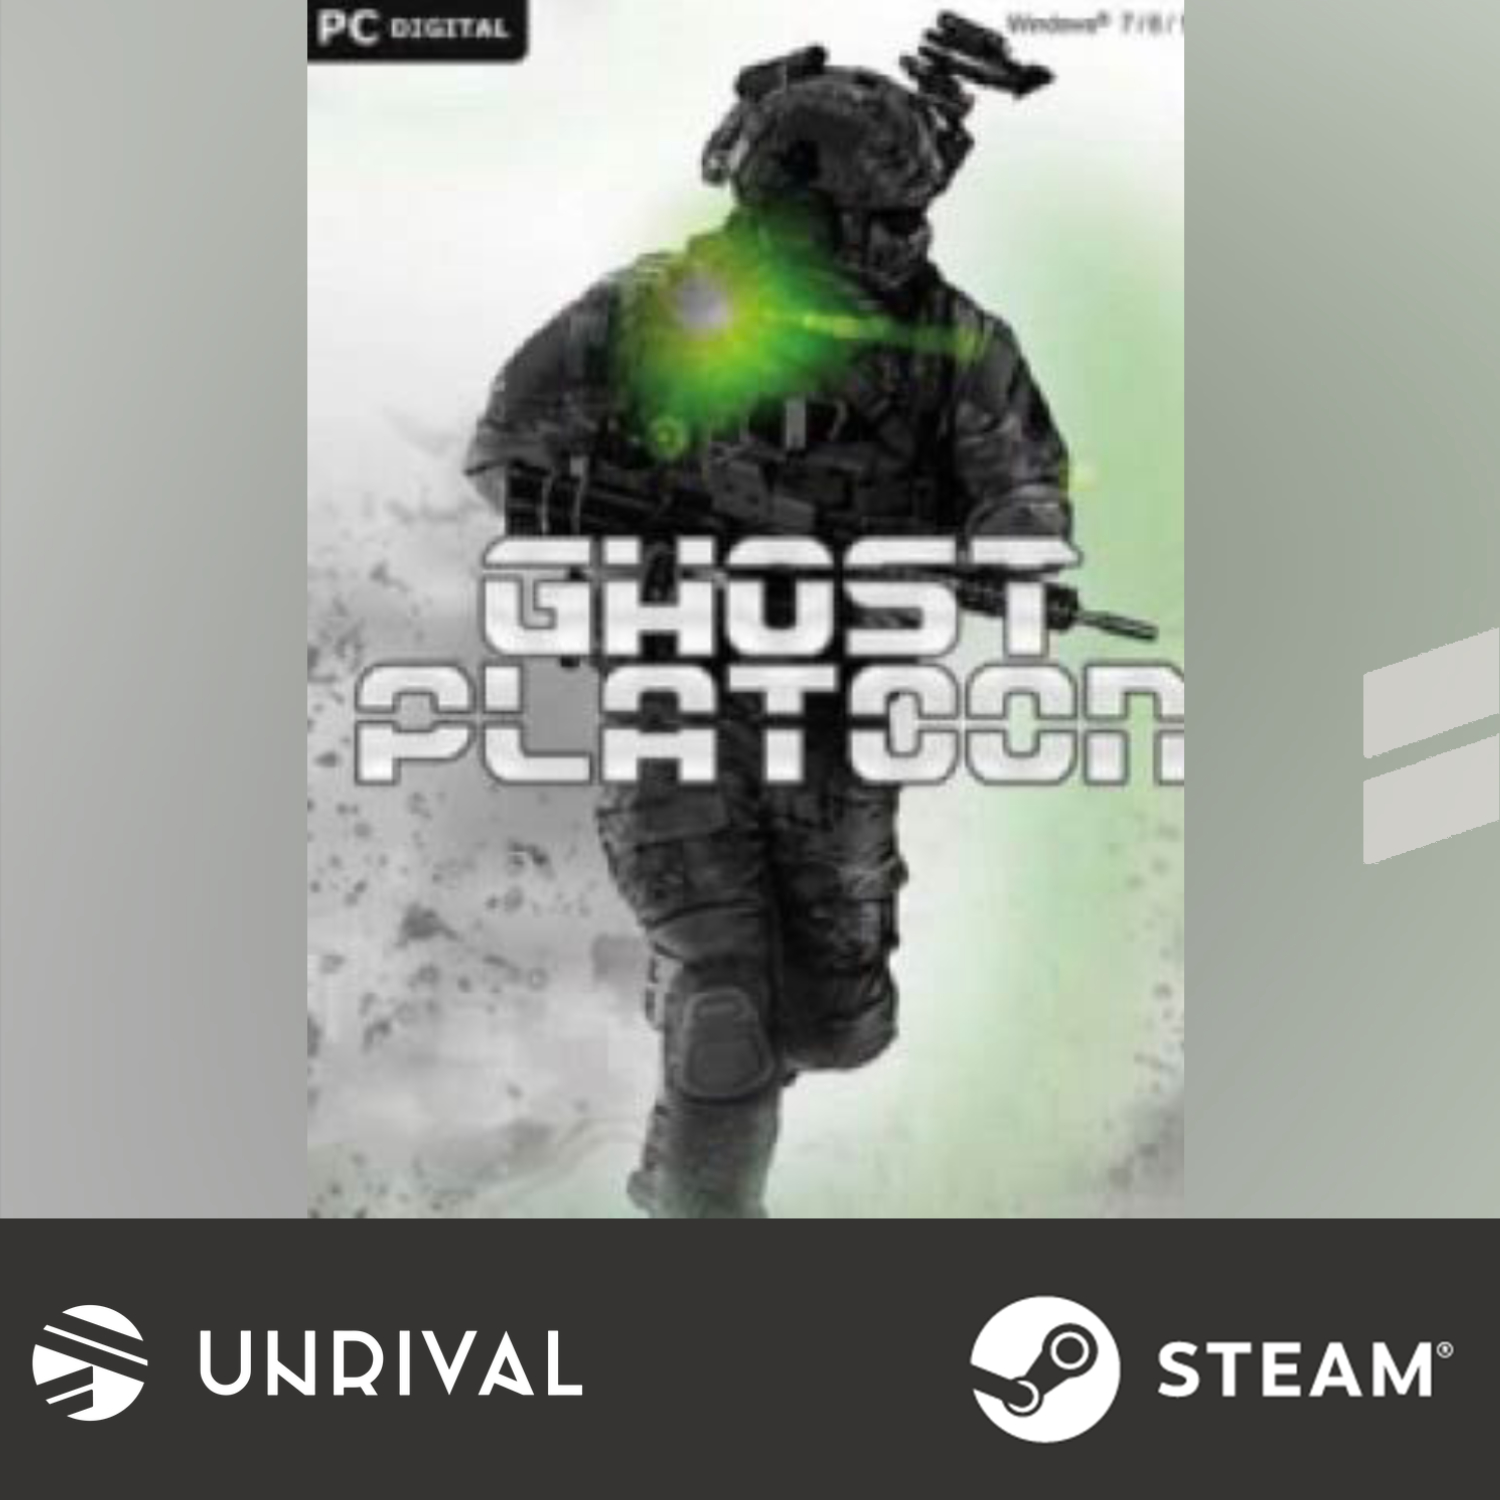 [Hot Sale] Ghost Platoon PC Digital Download Game (Multiplayer) - Unrival